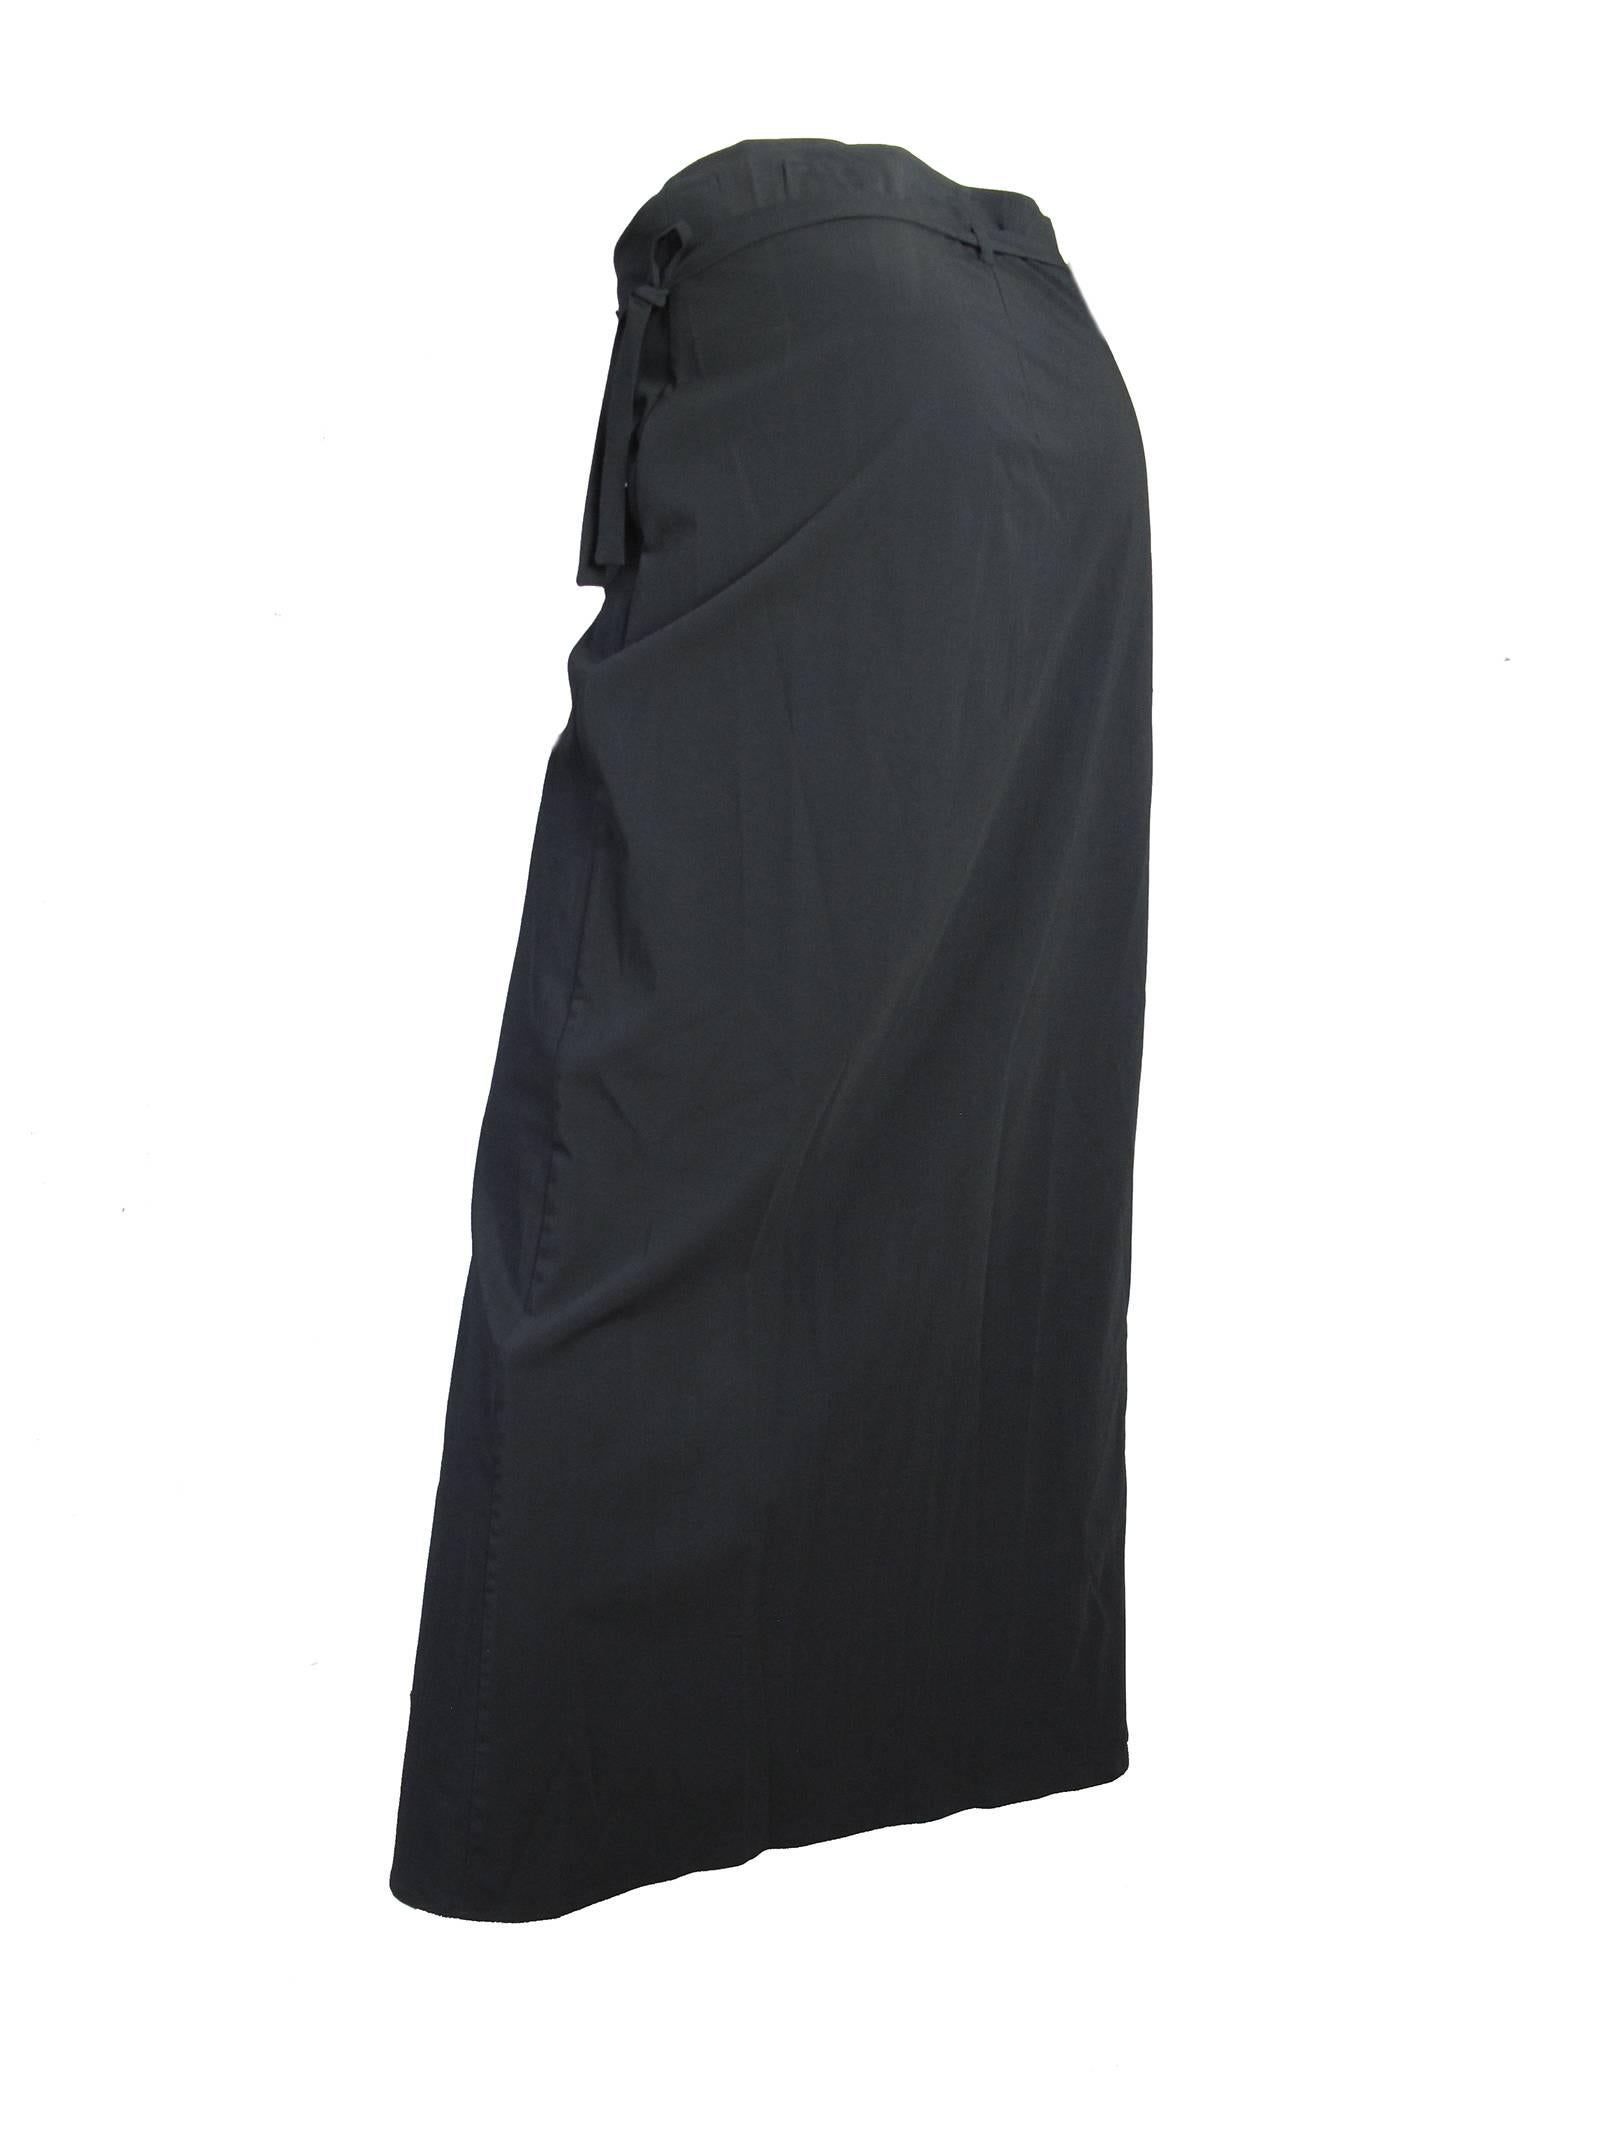 1990s black Jil Sander top and wrap skirt.  Fitted short sleeve top with zipper on side. Wrap skirt Viscose, silk and elasthane.  Made in Italy Condition: Excellent. Size 34
We accept returns for refund, please see our terms.  We offer free ground